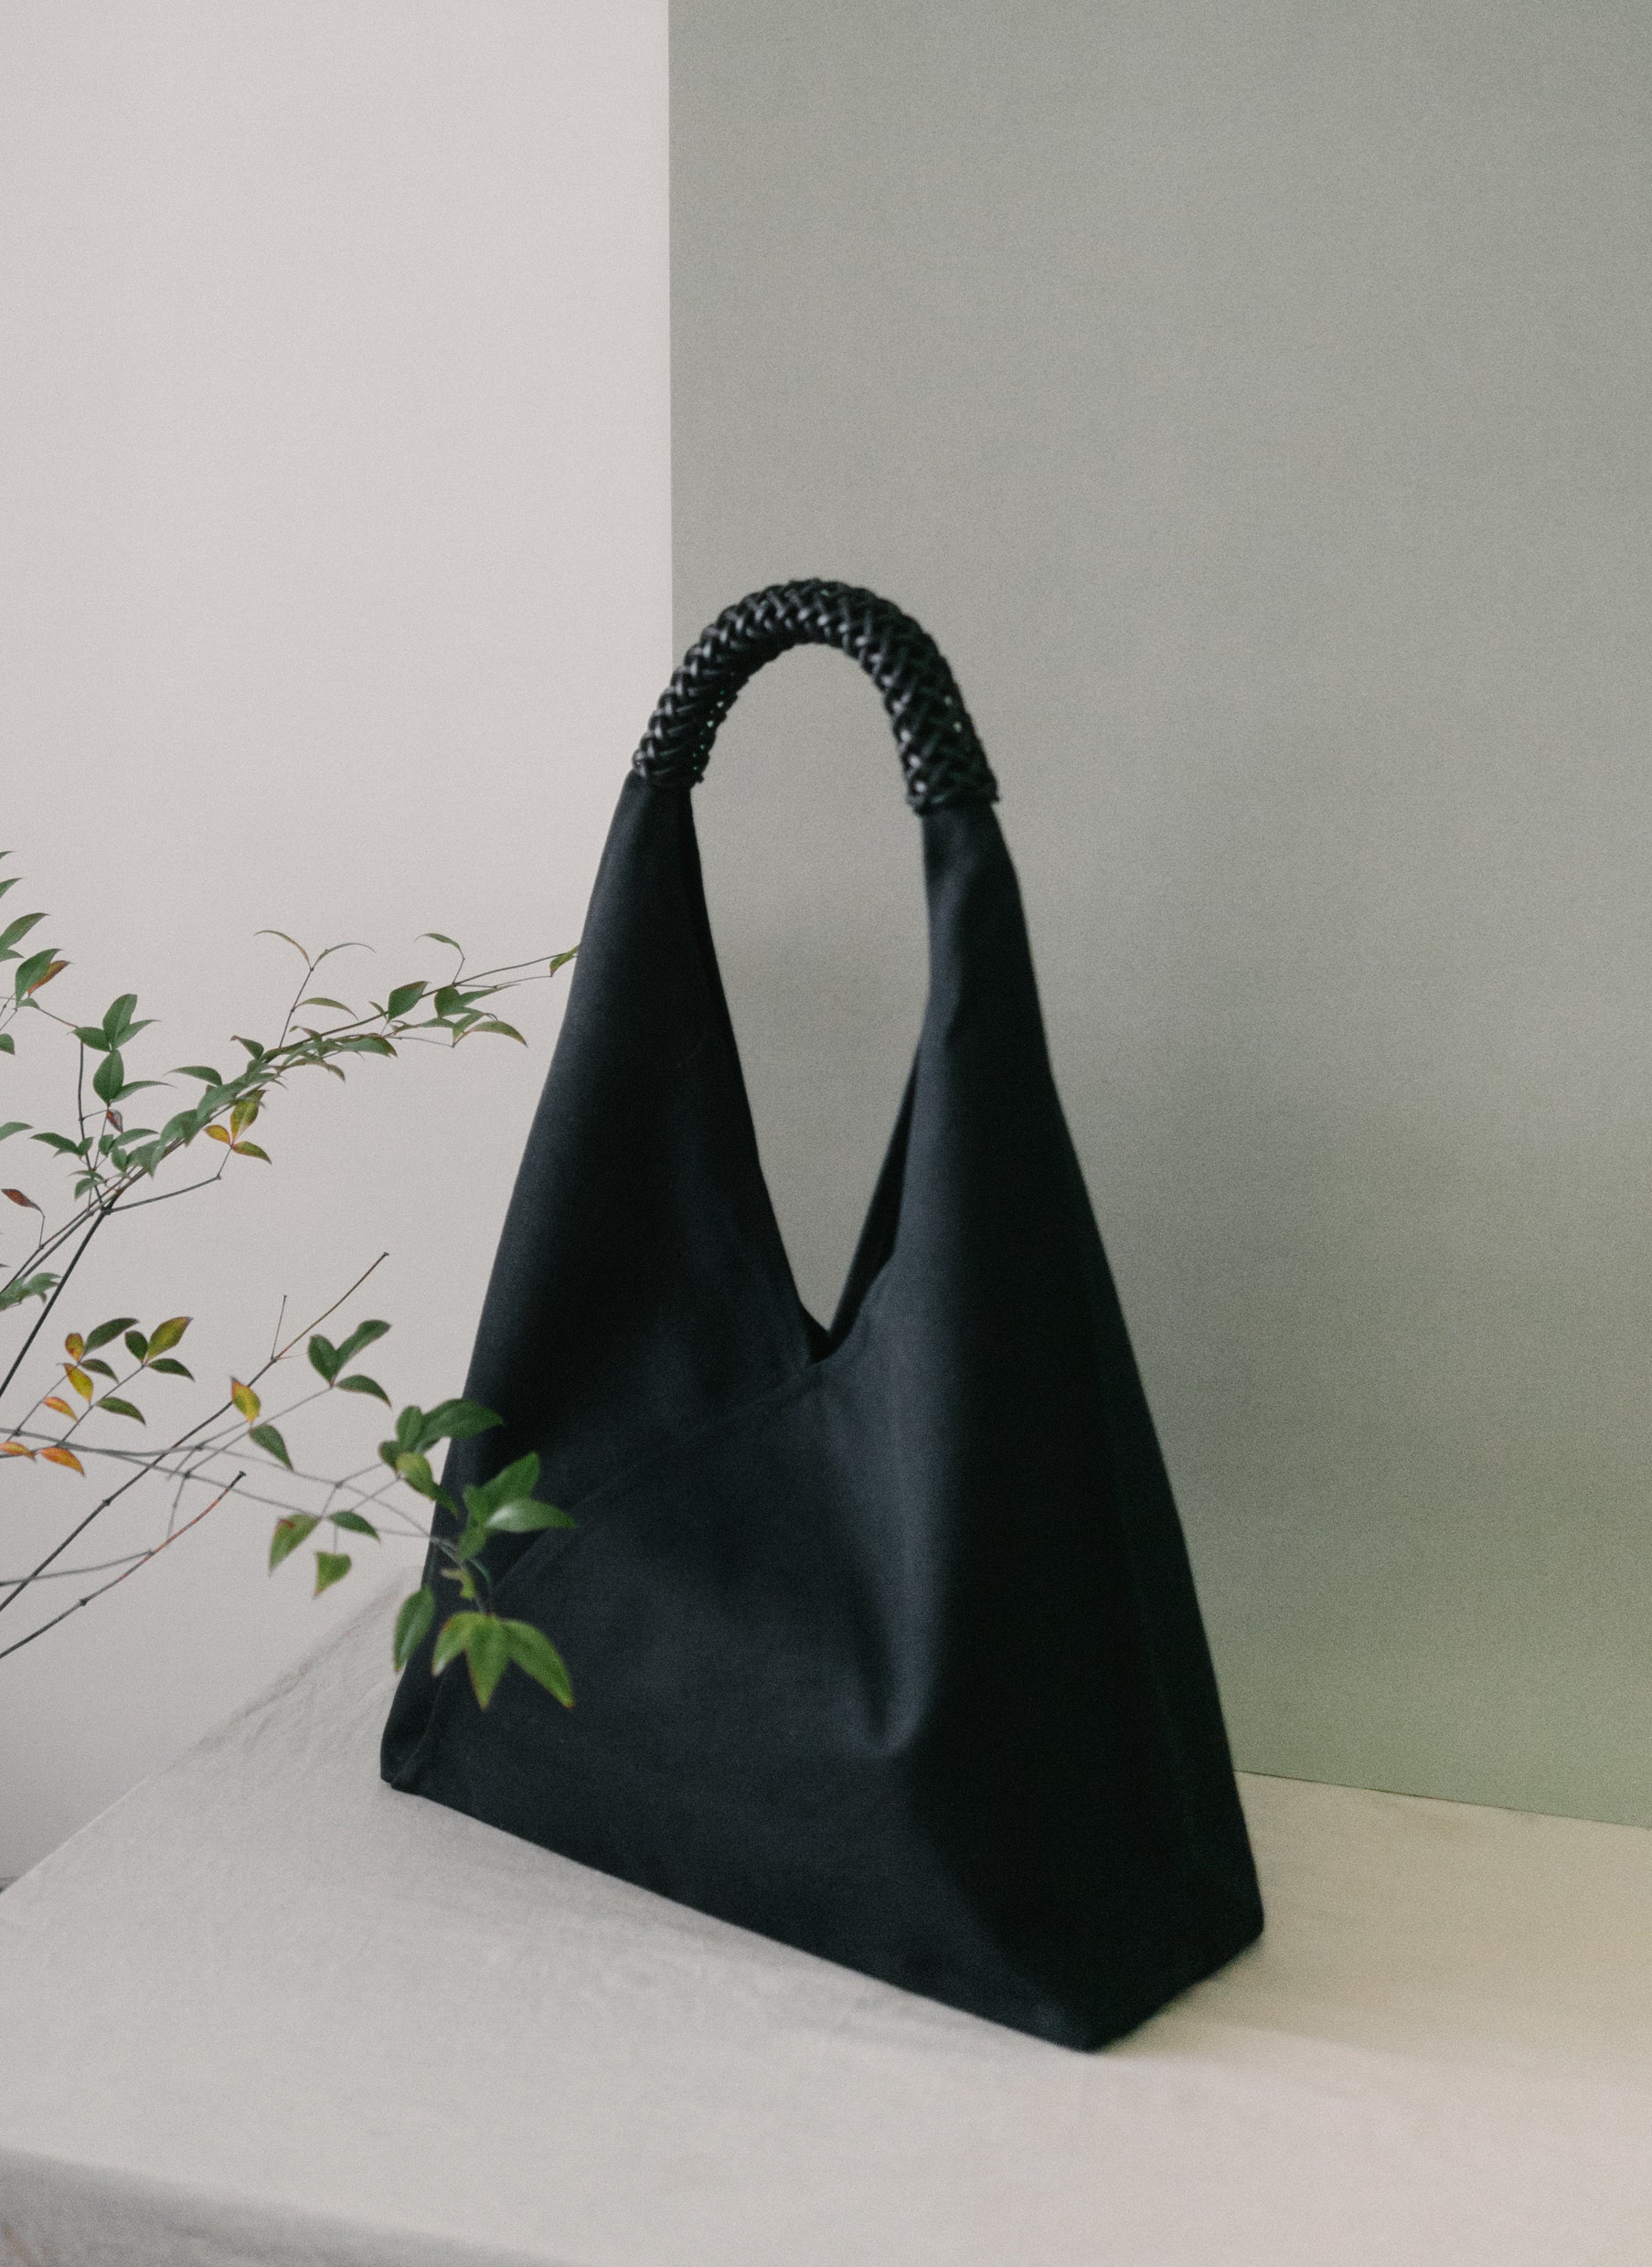 Woven Triangle Bag 58cm in All-Black